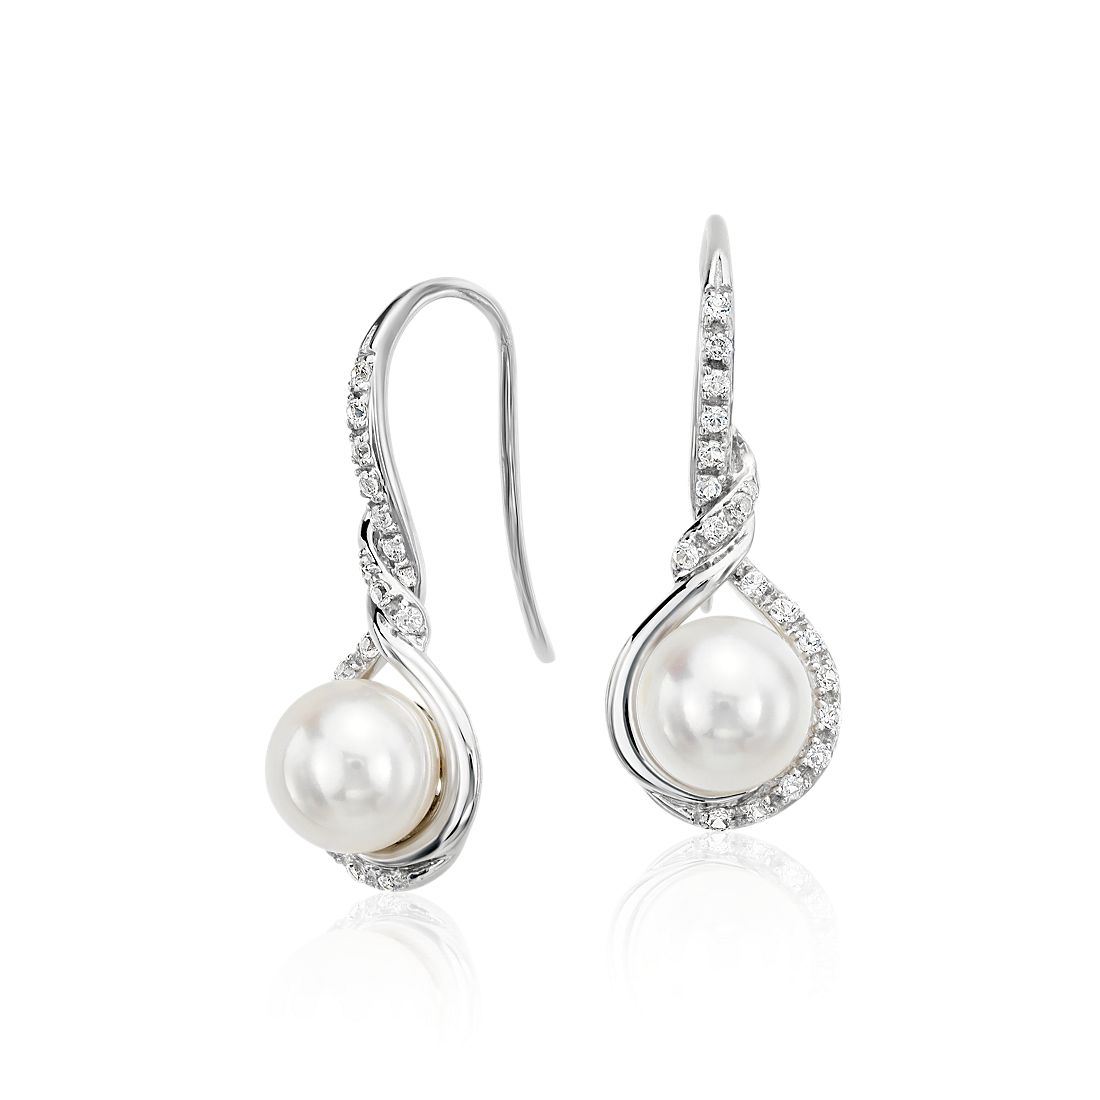 Freshwater Cultured Pearl and White Sapphire Drop Earrings in 14k White